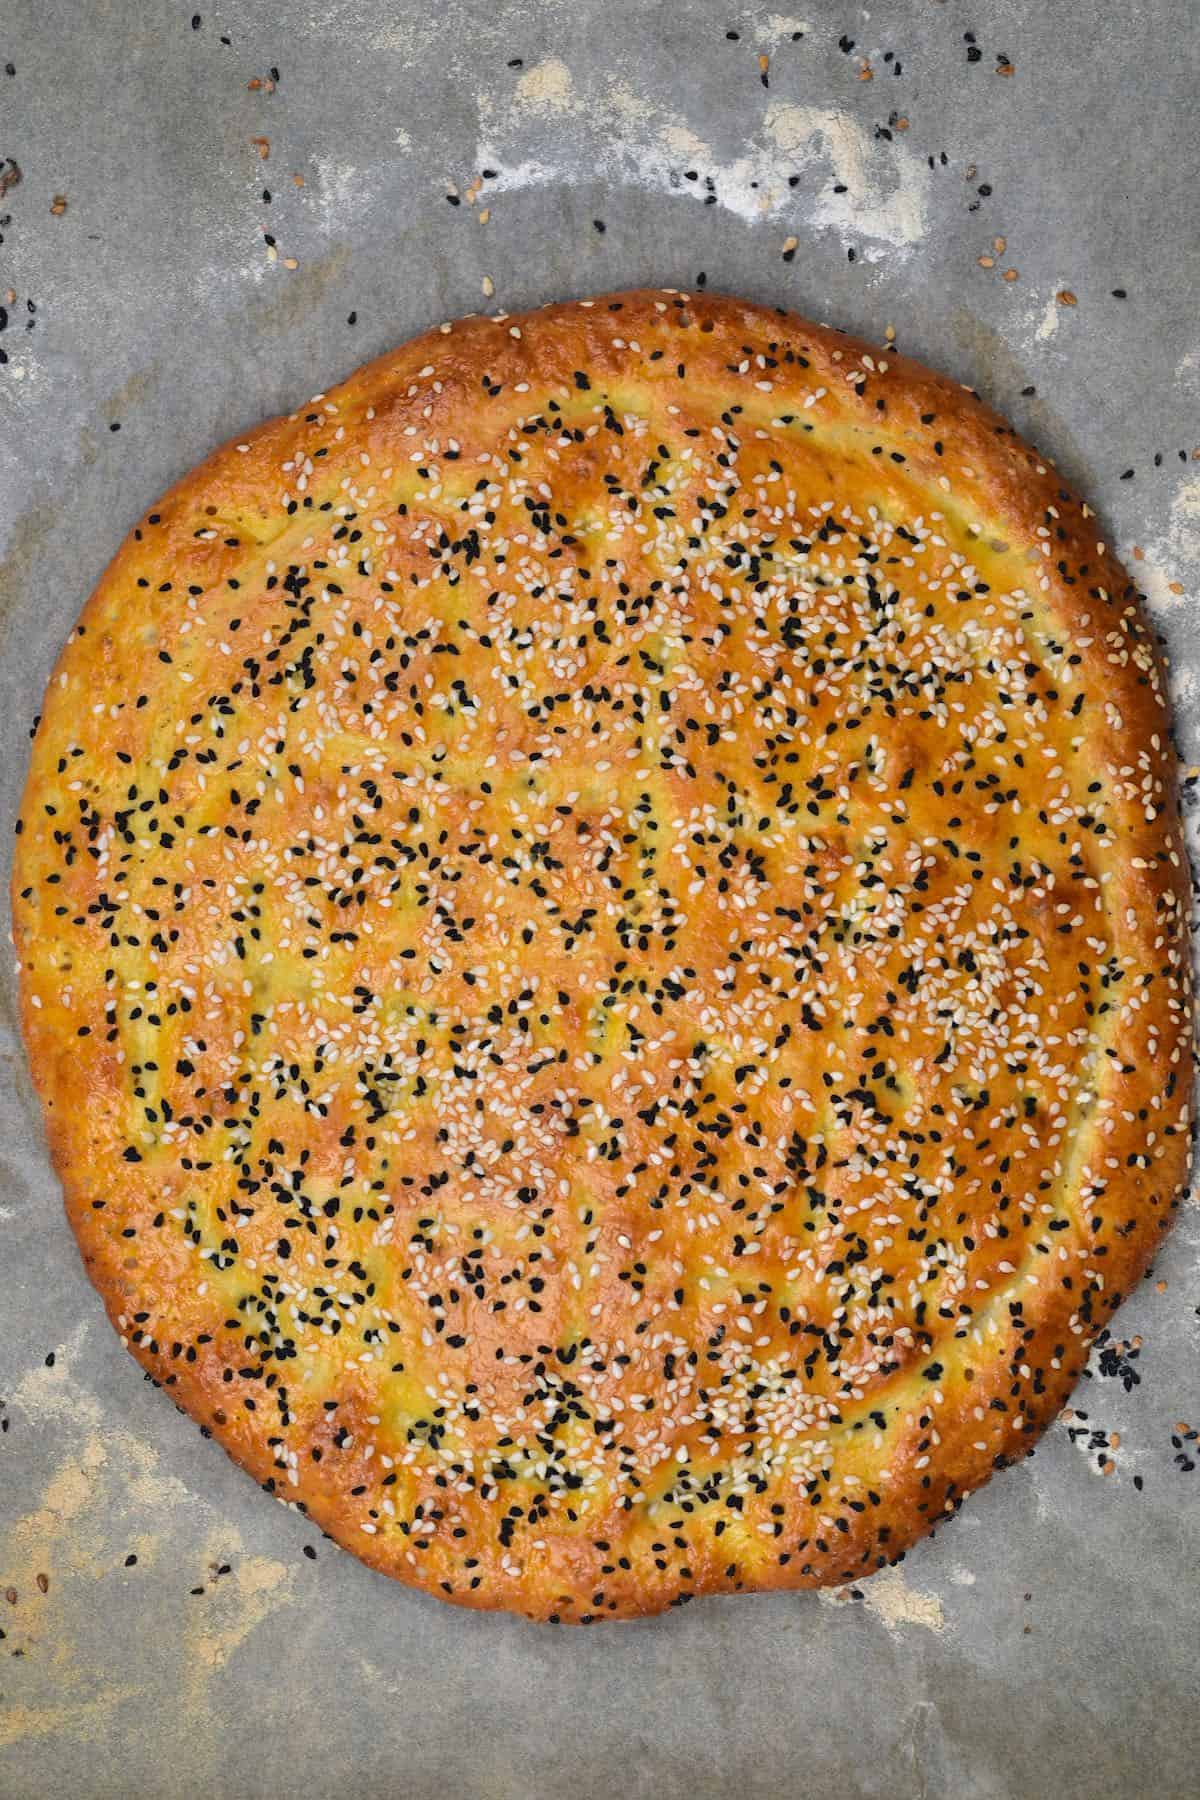 Baked pide bread on a tray